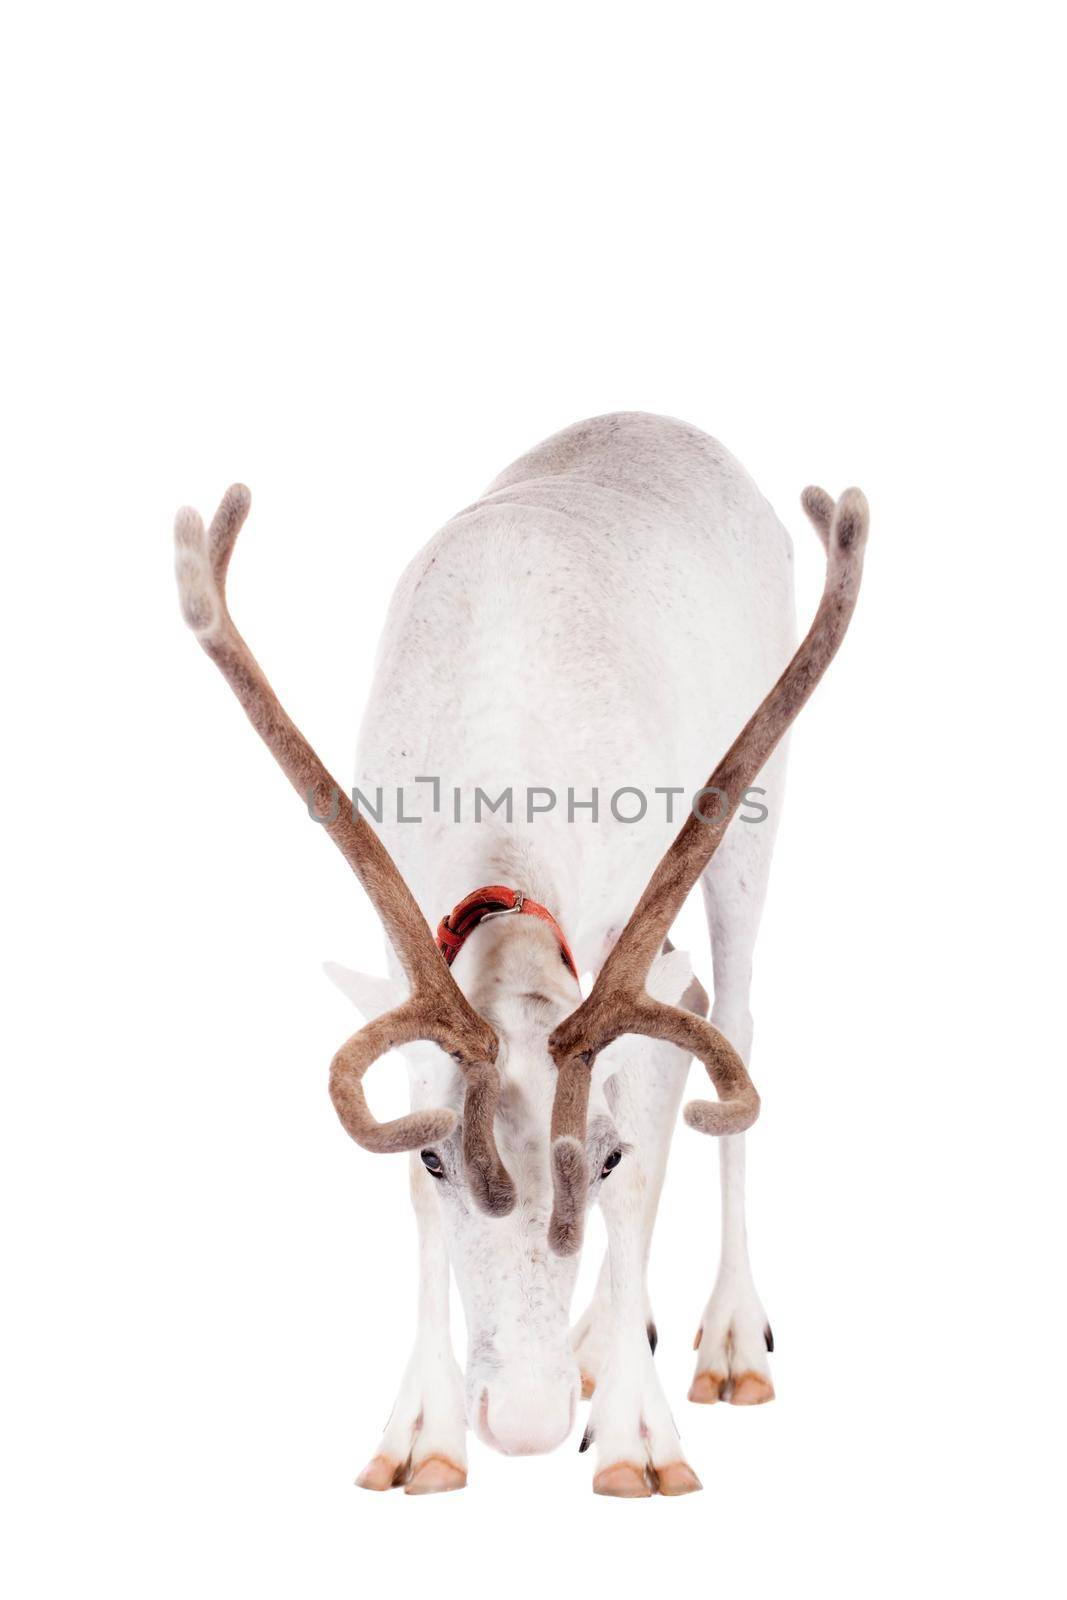 Reindeer or caribou, on the white background by RosaJay